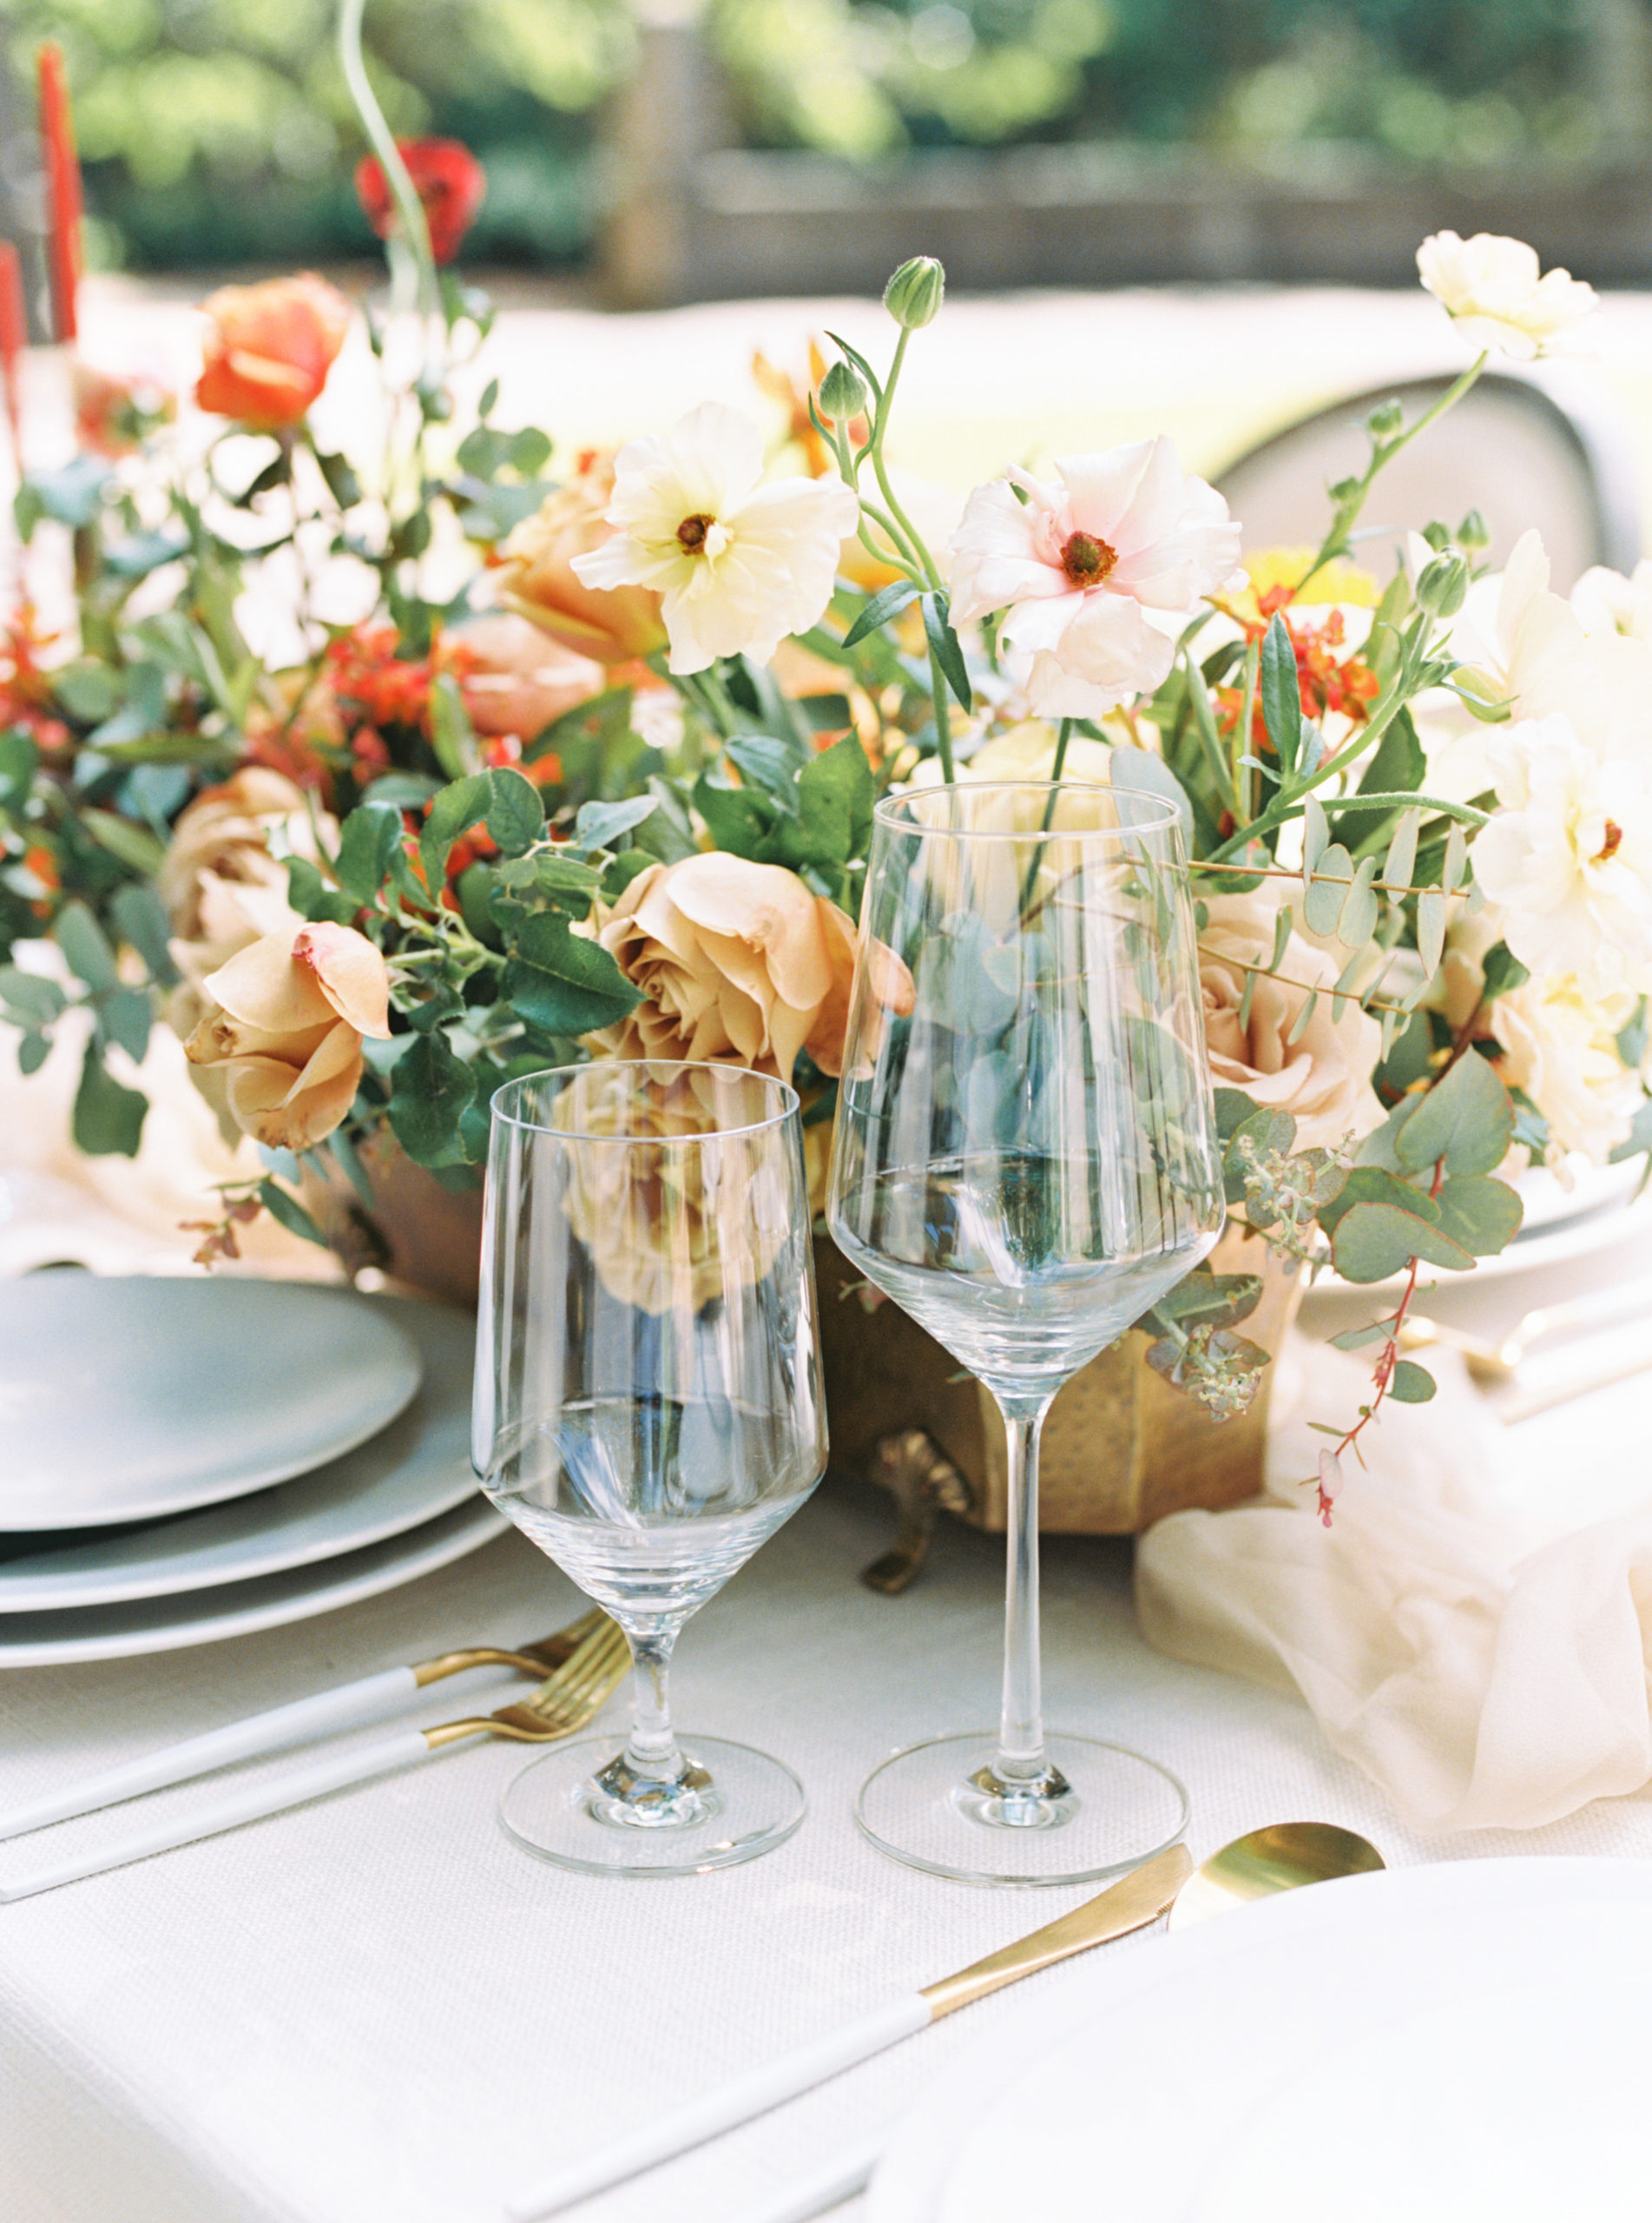 Elegant wine glasses with a wild floral arrangement on a table for a wedding